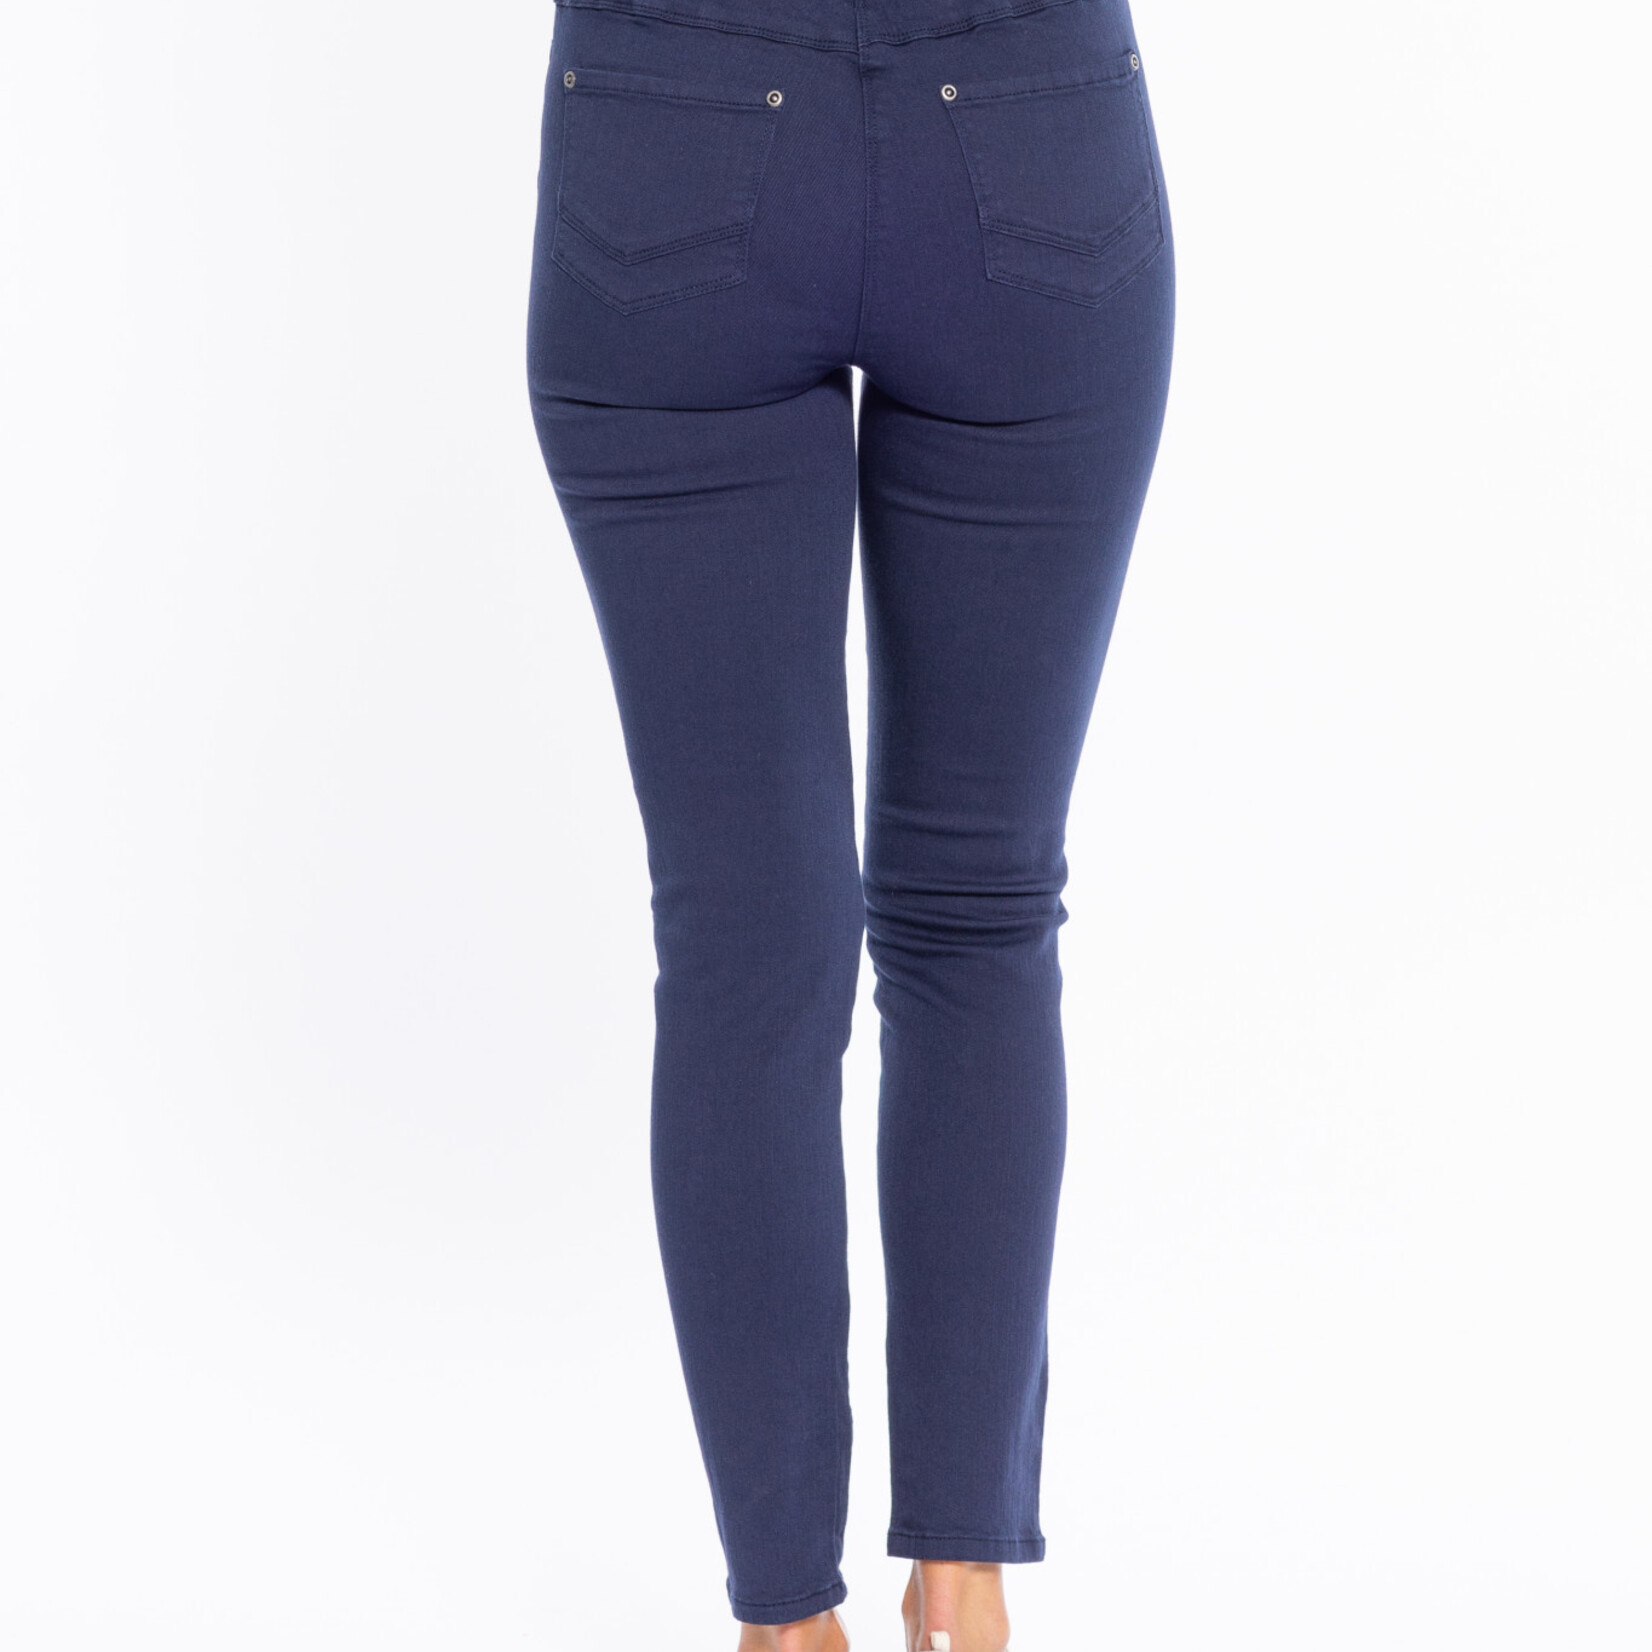 Cafe Latte Navy Cotton Fitted Leg Jeggings